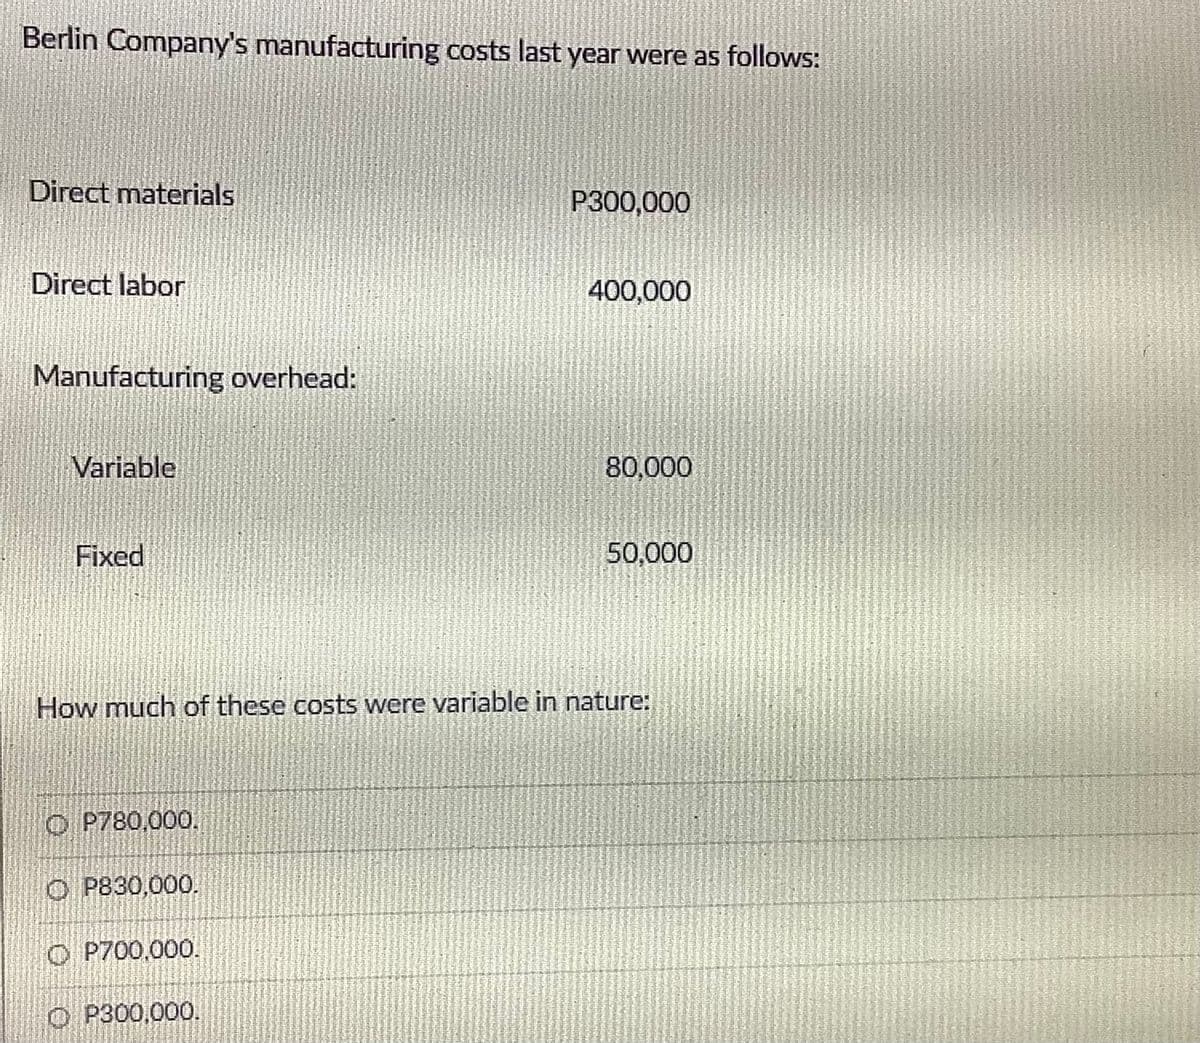 Berlin Company's manufacturing costs last year were as follows:
Direct materials
P300,000
Direct labor
400,000
Manufacturing overhead:
Variable
80,000
Fixed
50,000
How much of these costs were variable in nature:
O P780,000.
O P830,000.
O P700.000.
O P300,000.
